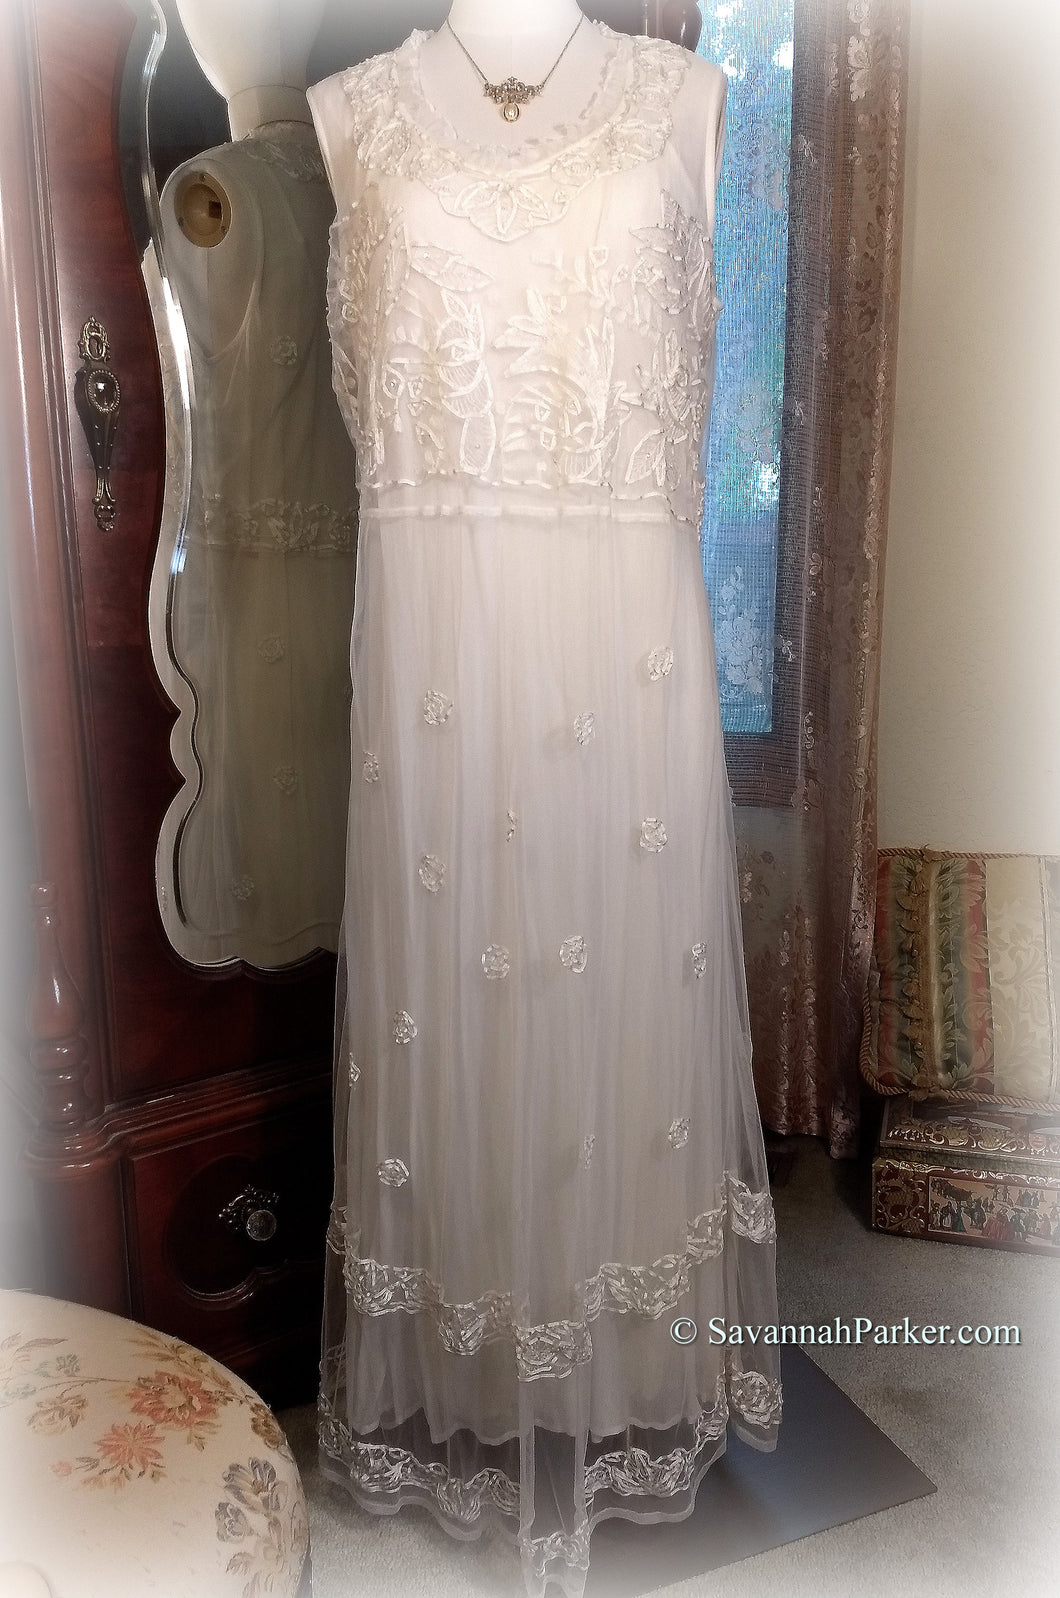 SOLD Exquisite Vintage April Cornell - Elegant White Appliqued Lace and Rayon Chiffon - Summer Wedding - Garden Party Tea Dress - New w/out Tags